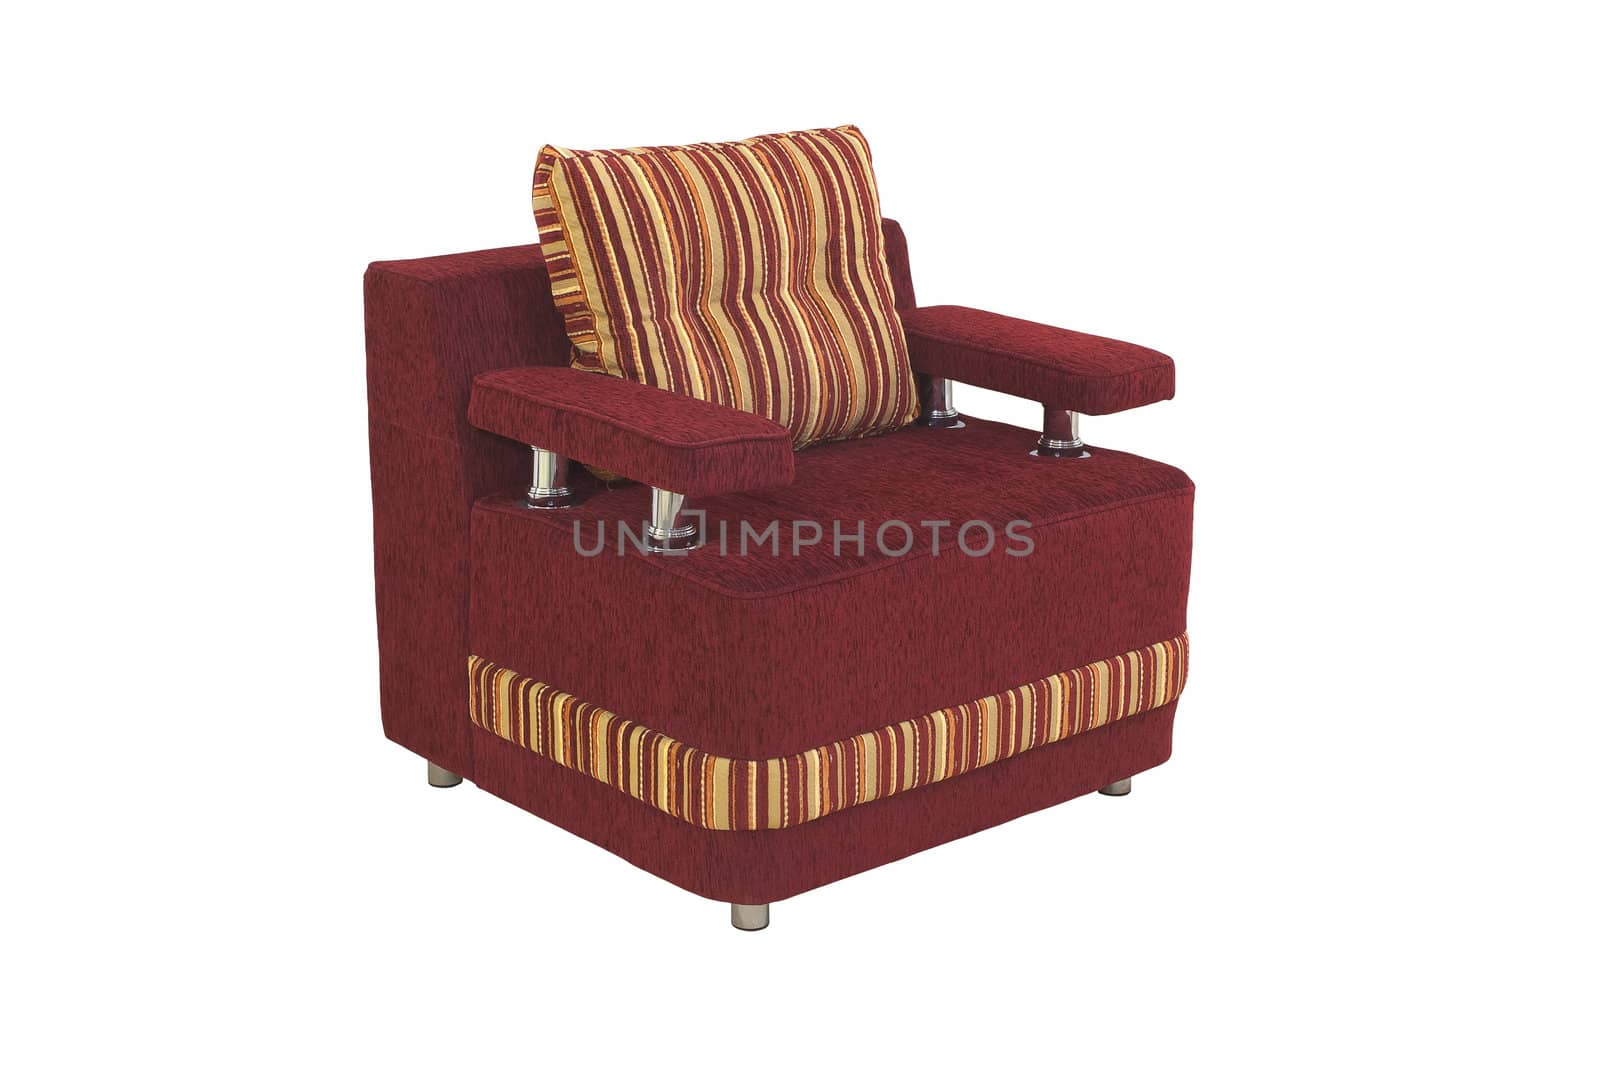 A armchair isolated on a white background